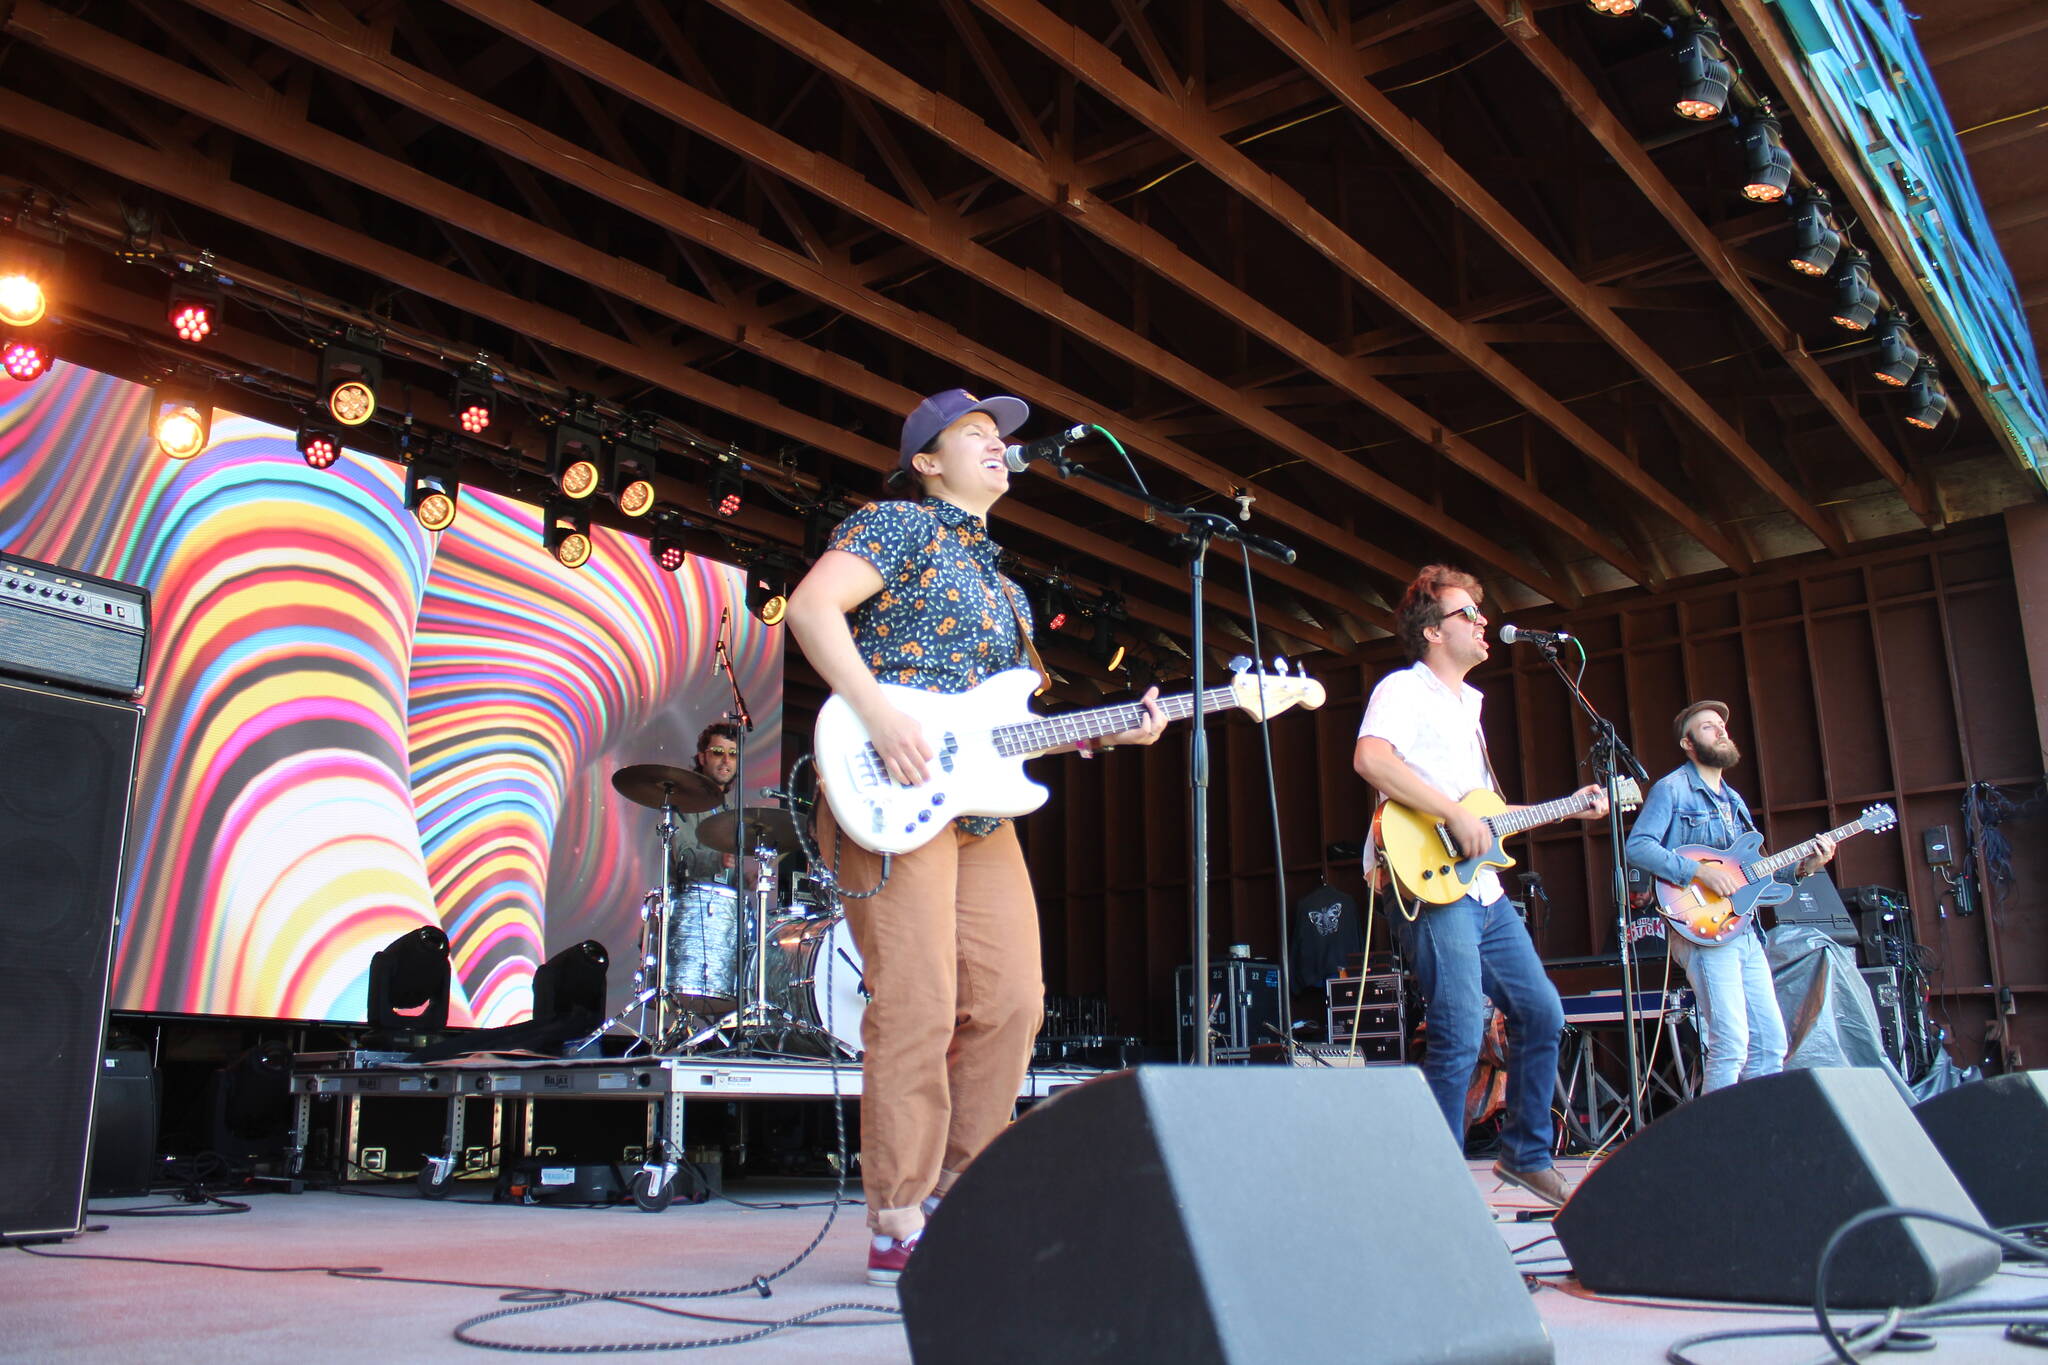 The Jangle Bees perform at Salmonfest on Friday, Aug. 5, 2022. (Camille Botello/Peninsula Clarion)